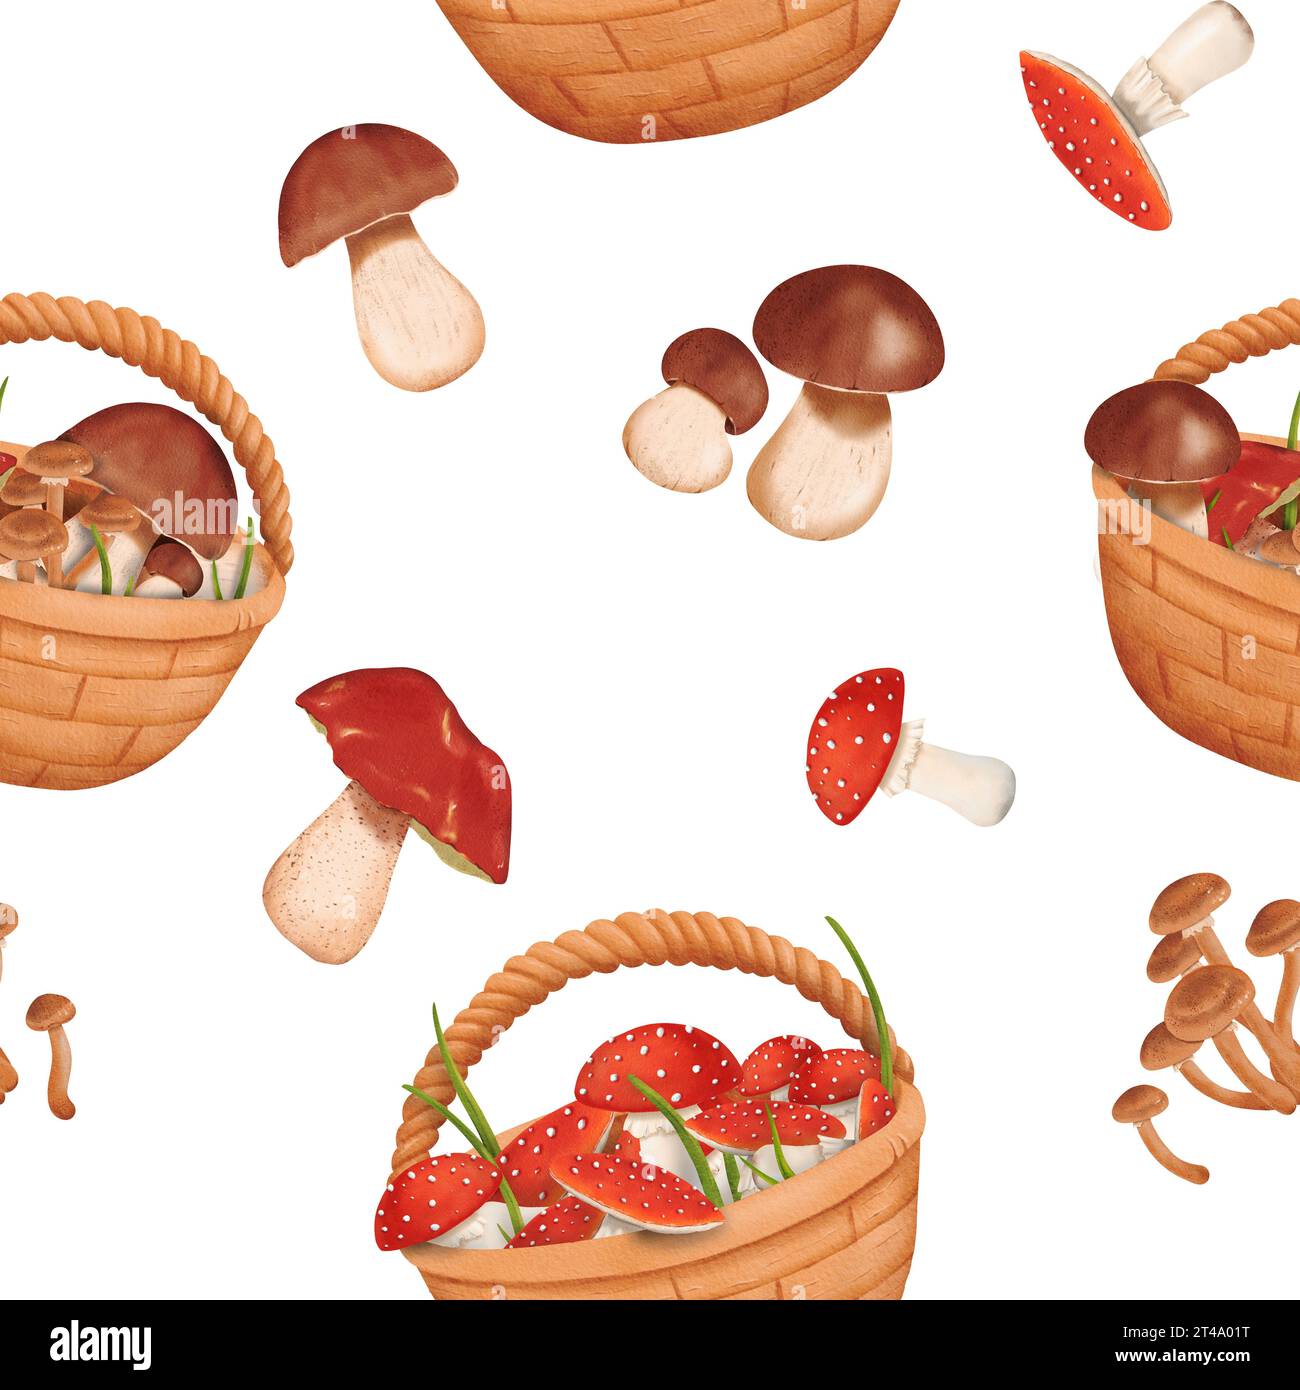 Woodland seamless pattern. harvest of various mushrooms. Baskets filled with forest treasures. Edible penny bun and delicious porcini mushrooms Stock Photo